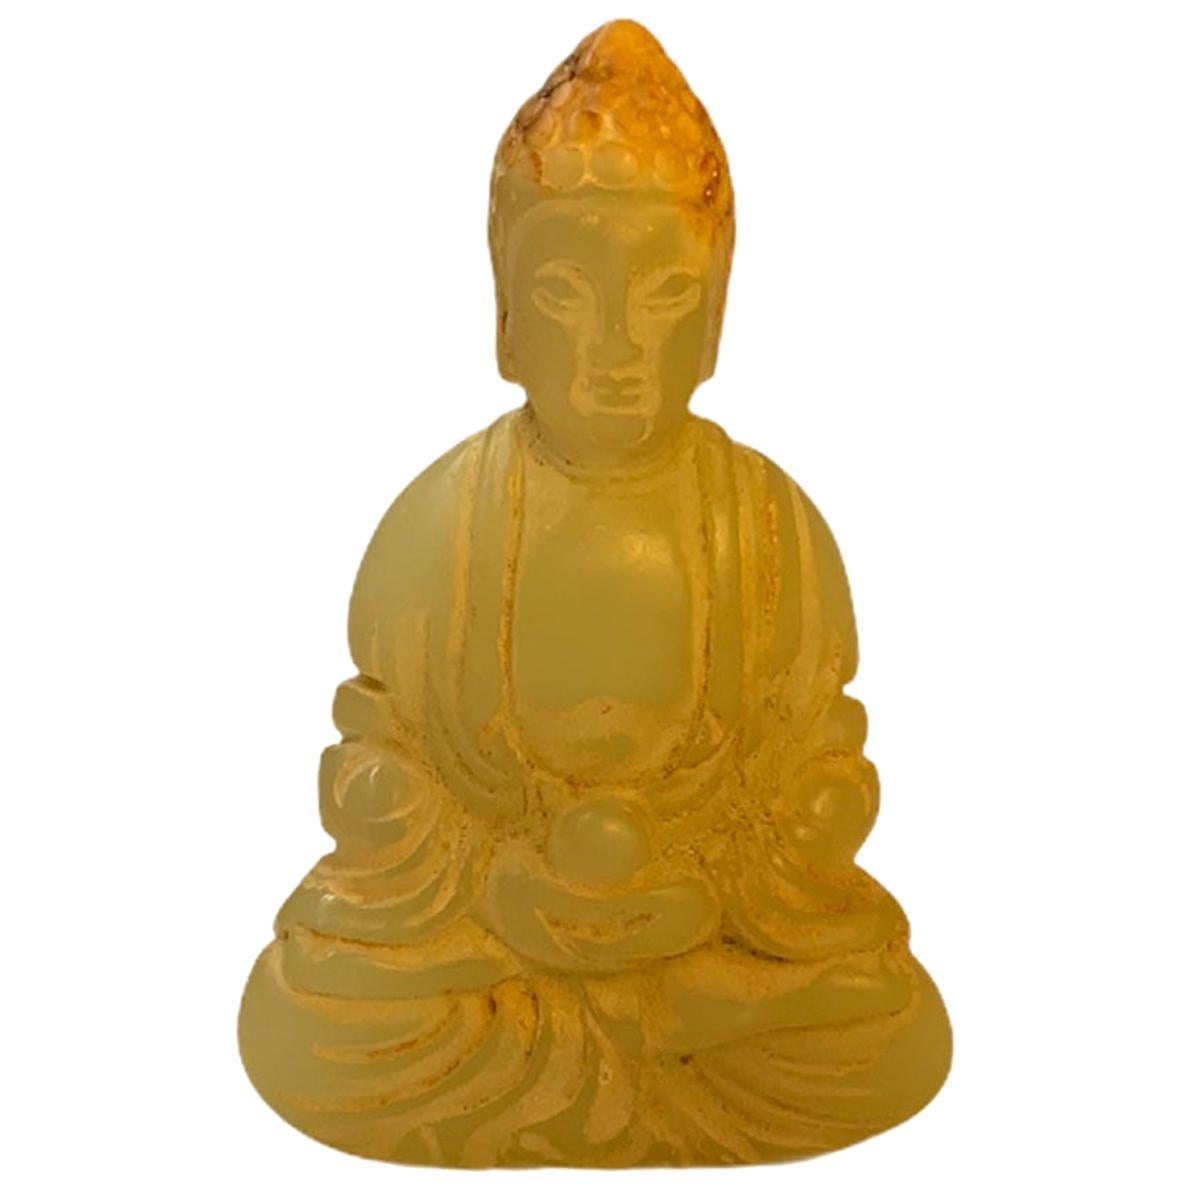 Small Carved Buddha Figure Sculpture